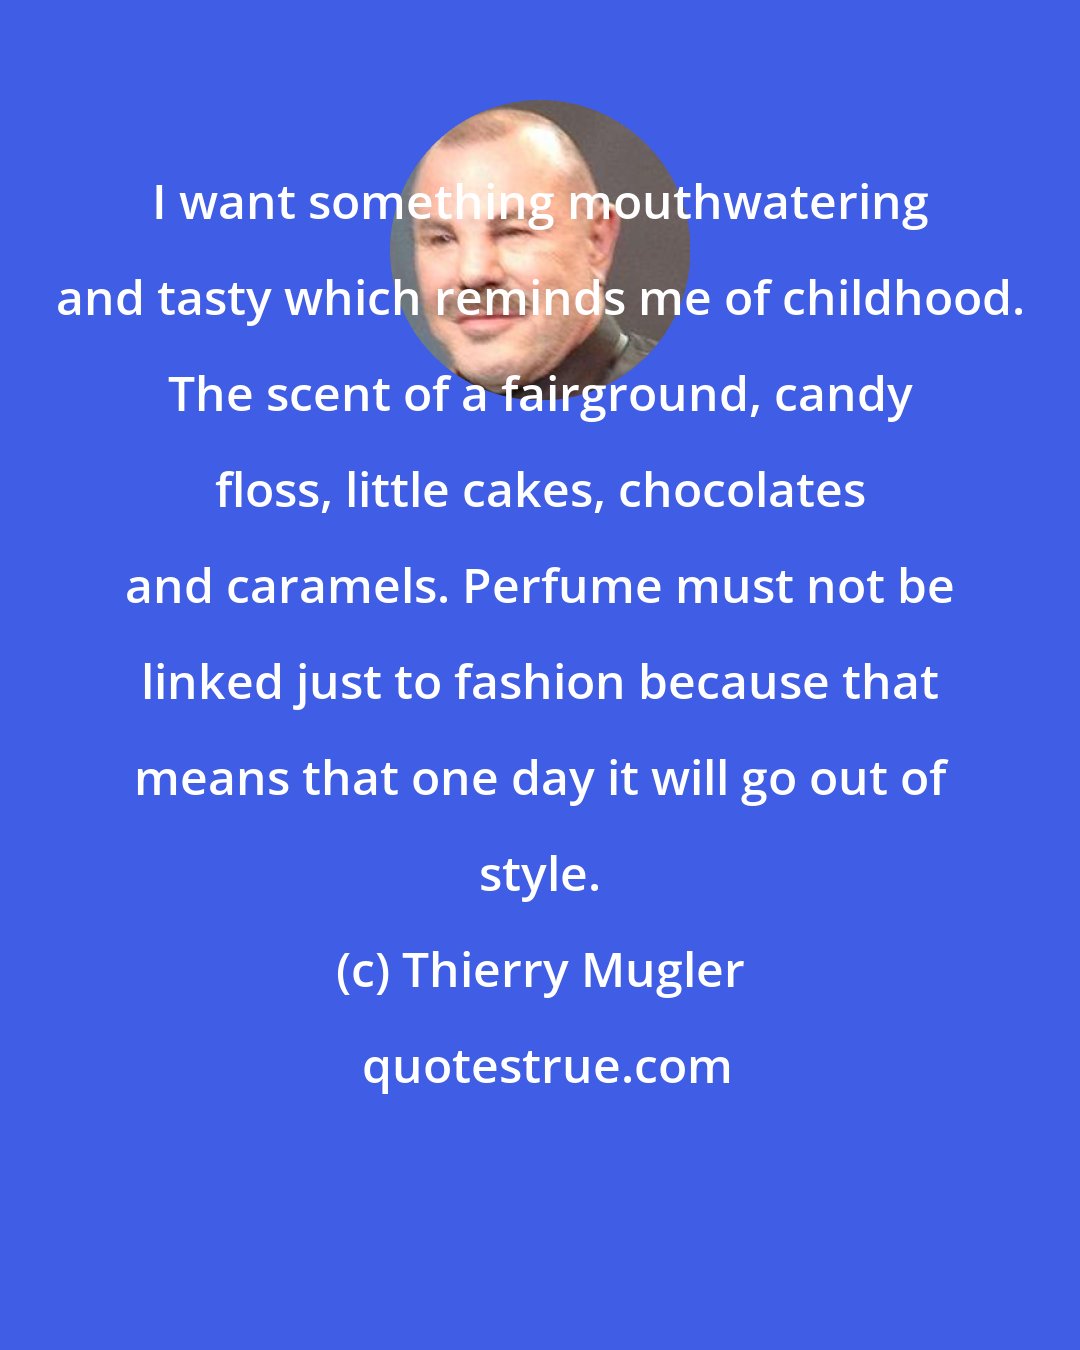 Thierry Mugler: I want something mouthwatering and tasty which reminds me of childhood. The scent of a fairground, candy floss, little cakes, chocolates and caramels. Perfume must not be linked just to fashion because that means that one day it will go out of style.